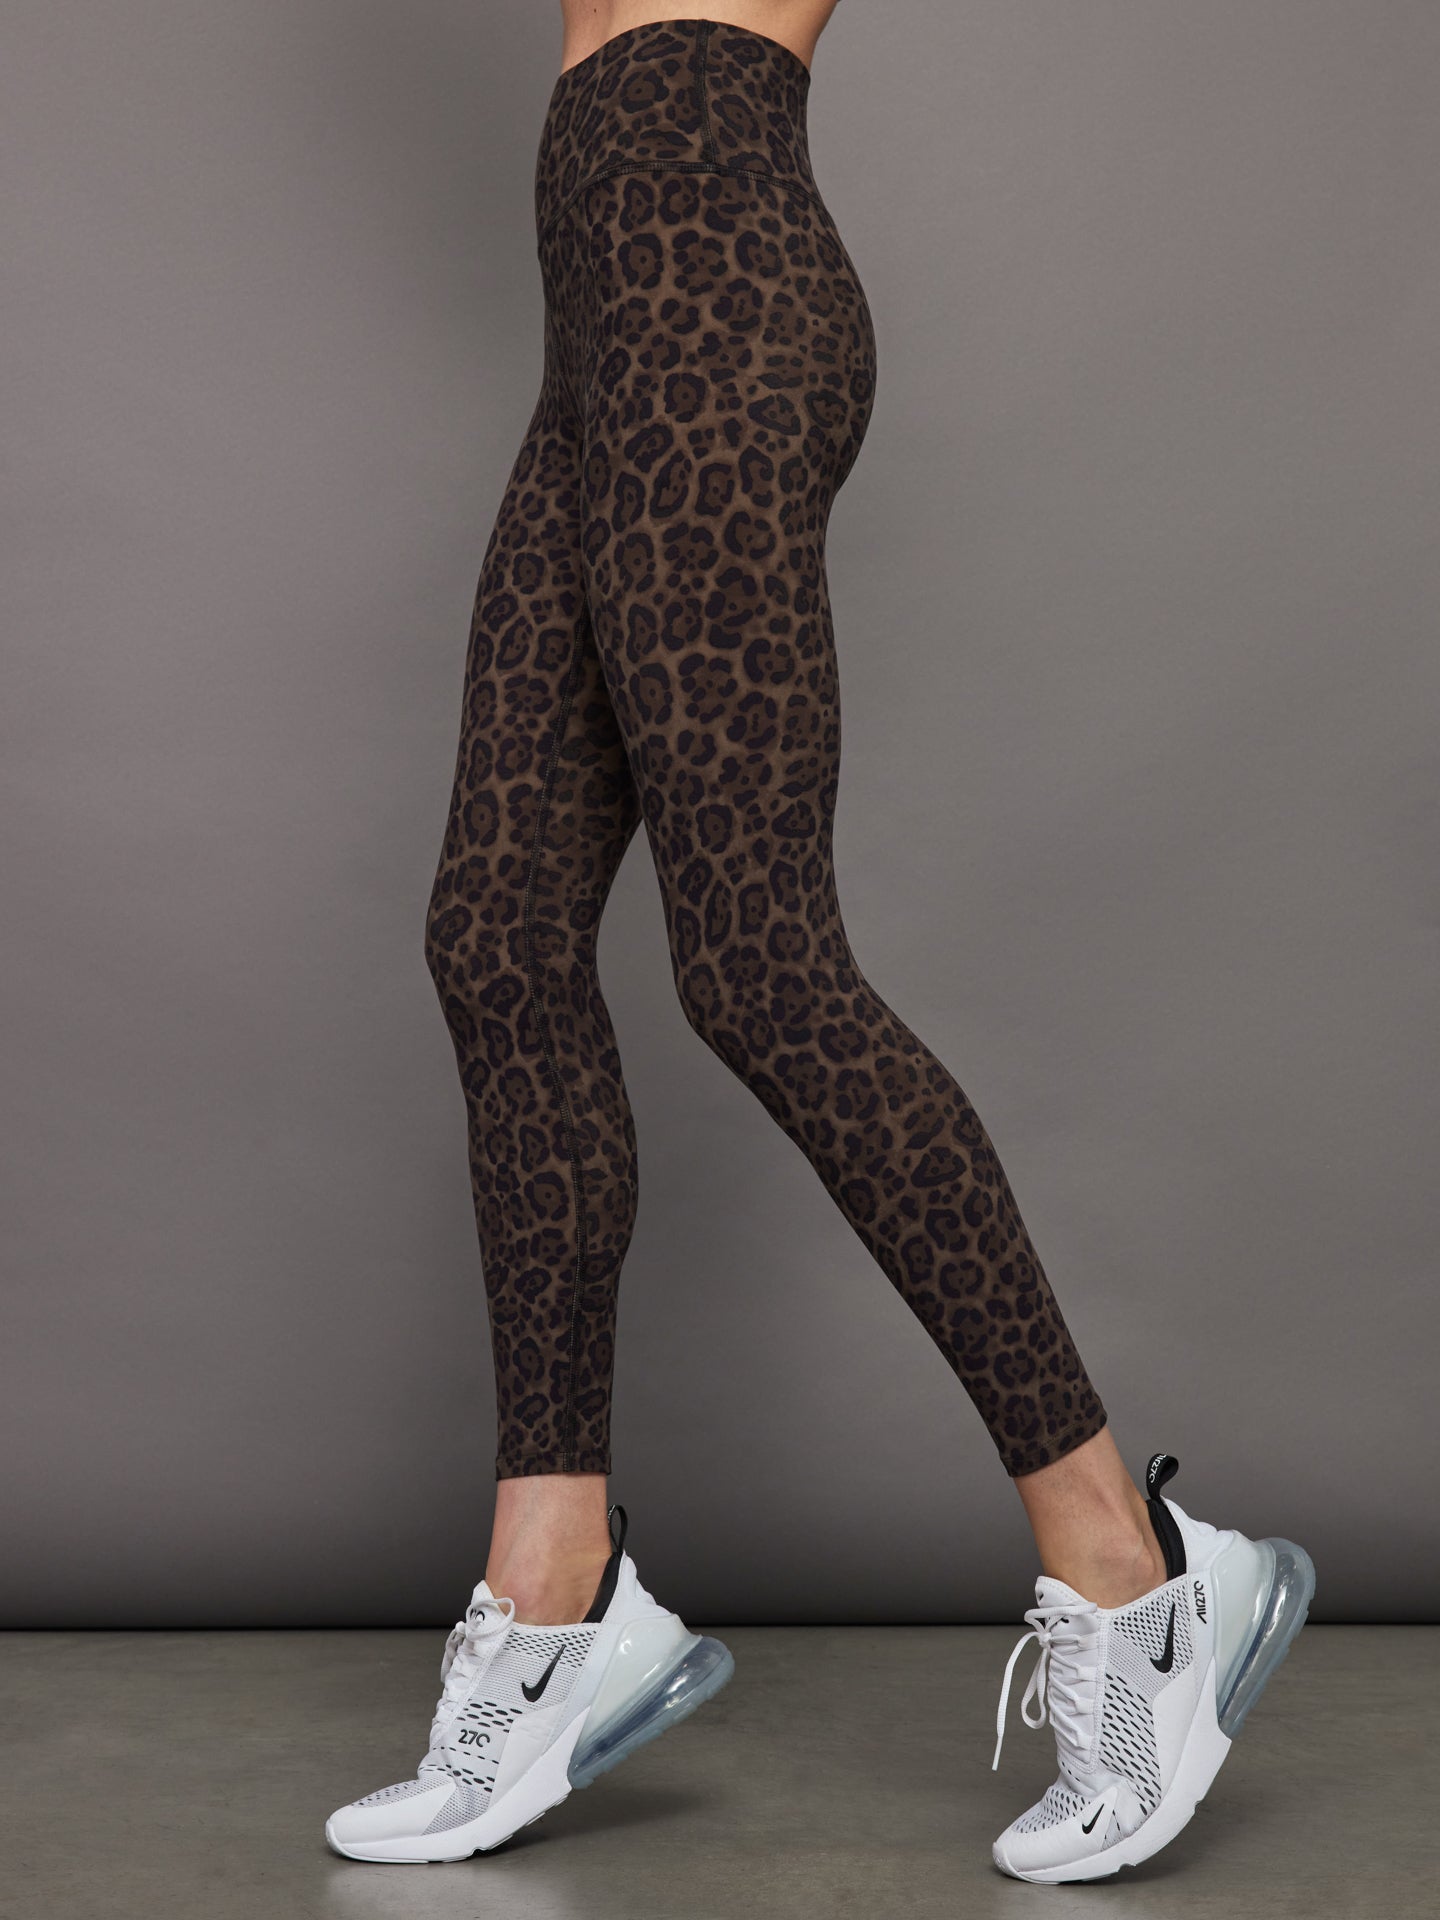 Leggings With Leopard Print All Over Grey Yoga Pants Animal Skin